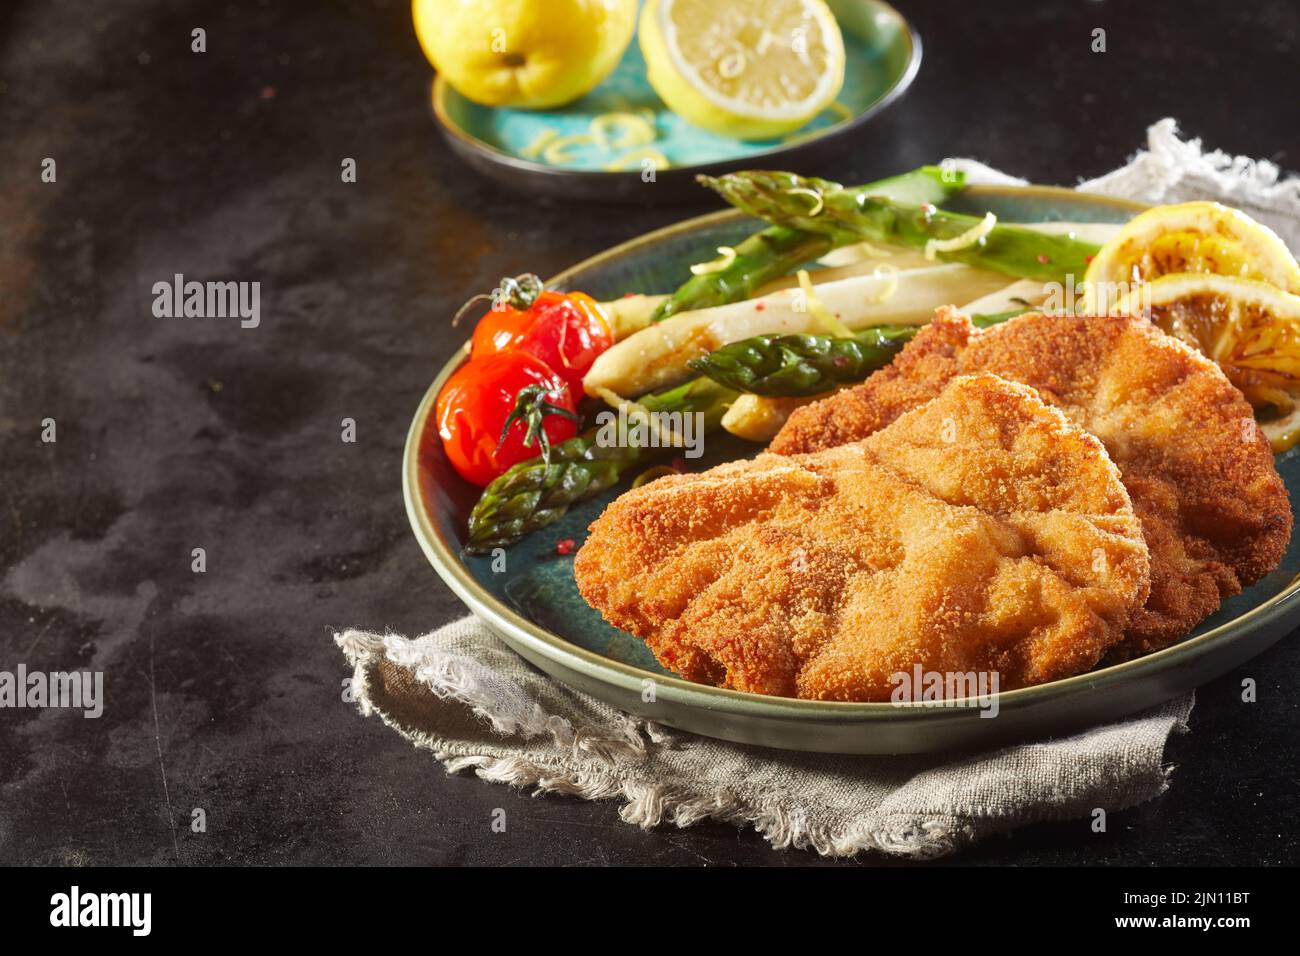 Hceramic plate of schnitzels and asparagus with cherry tomatoes and lemons placed on linen napkin on black background Stock Photo